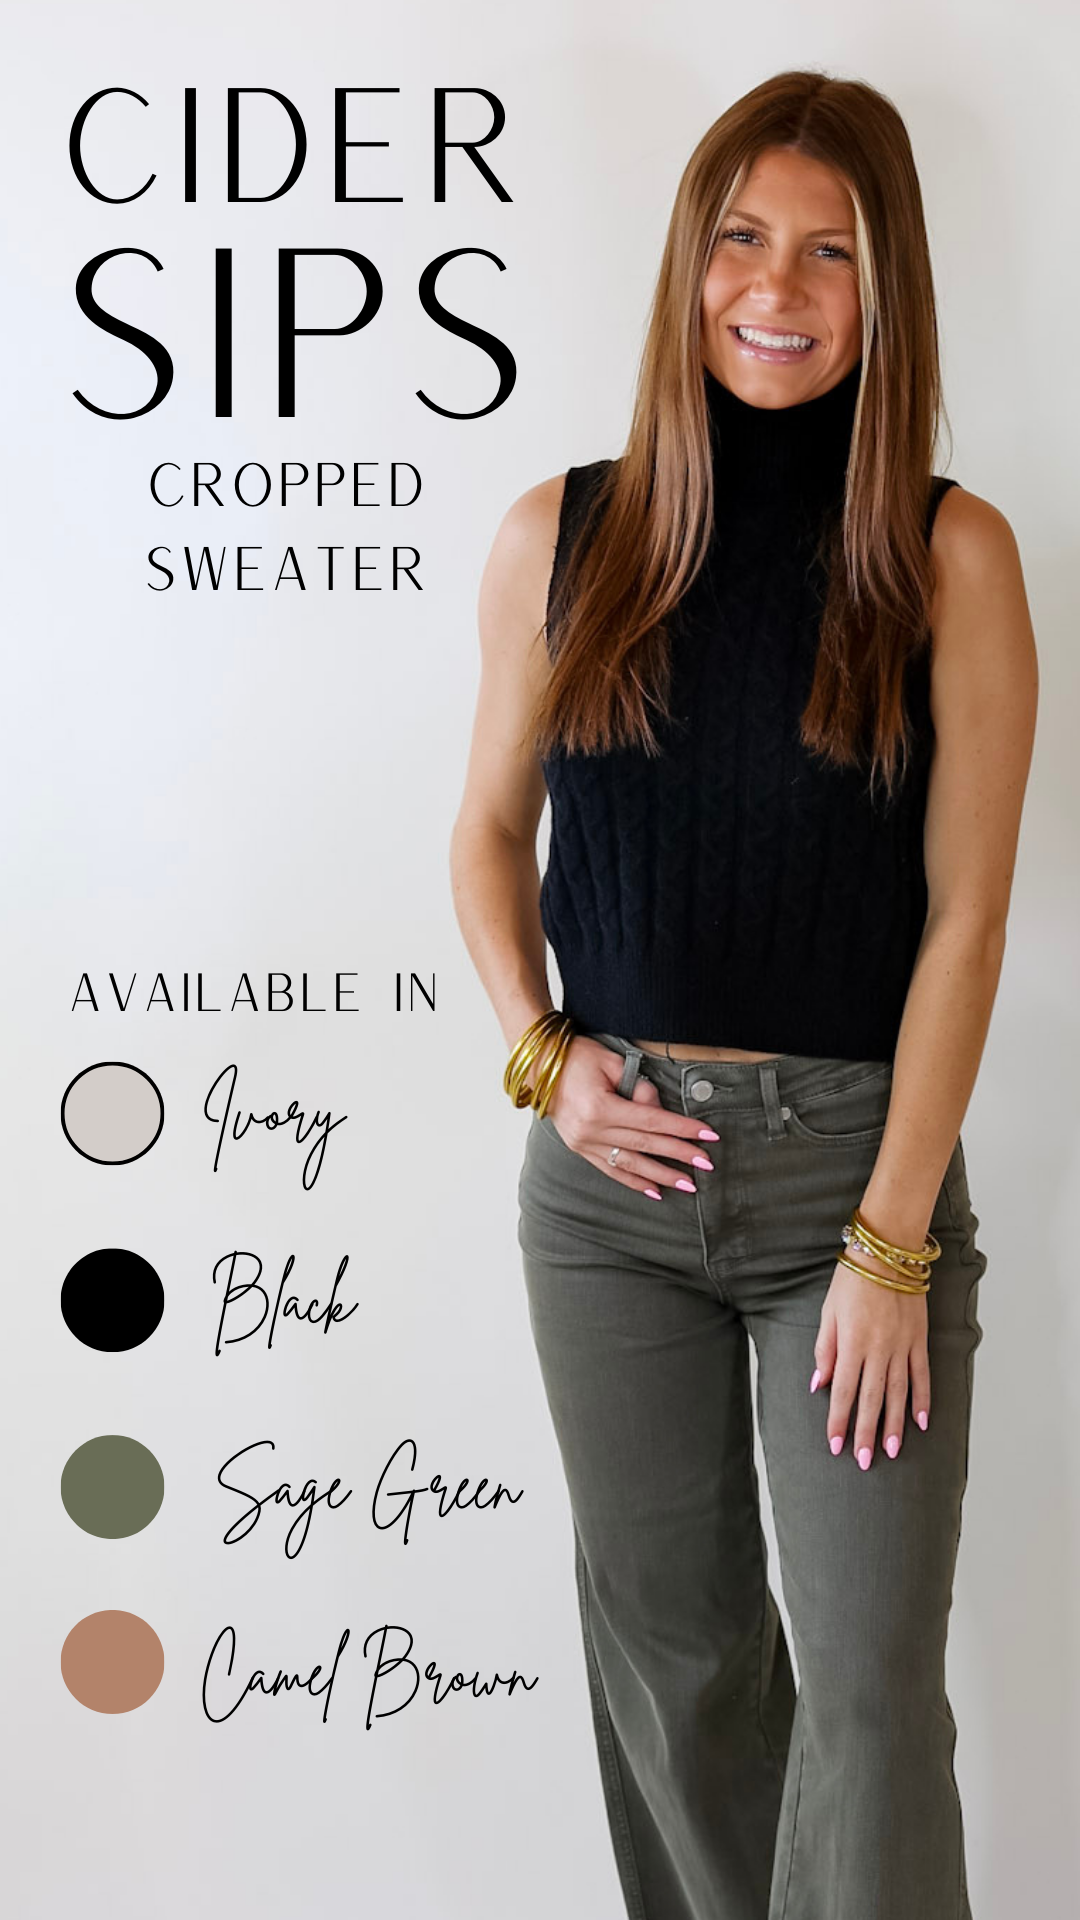 Cider Sips Cropped Sweater Tank Top with High Neck in Black - Giddy Up Glamour Boutique